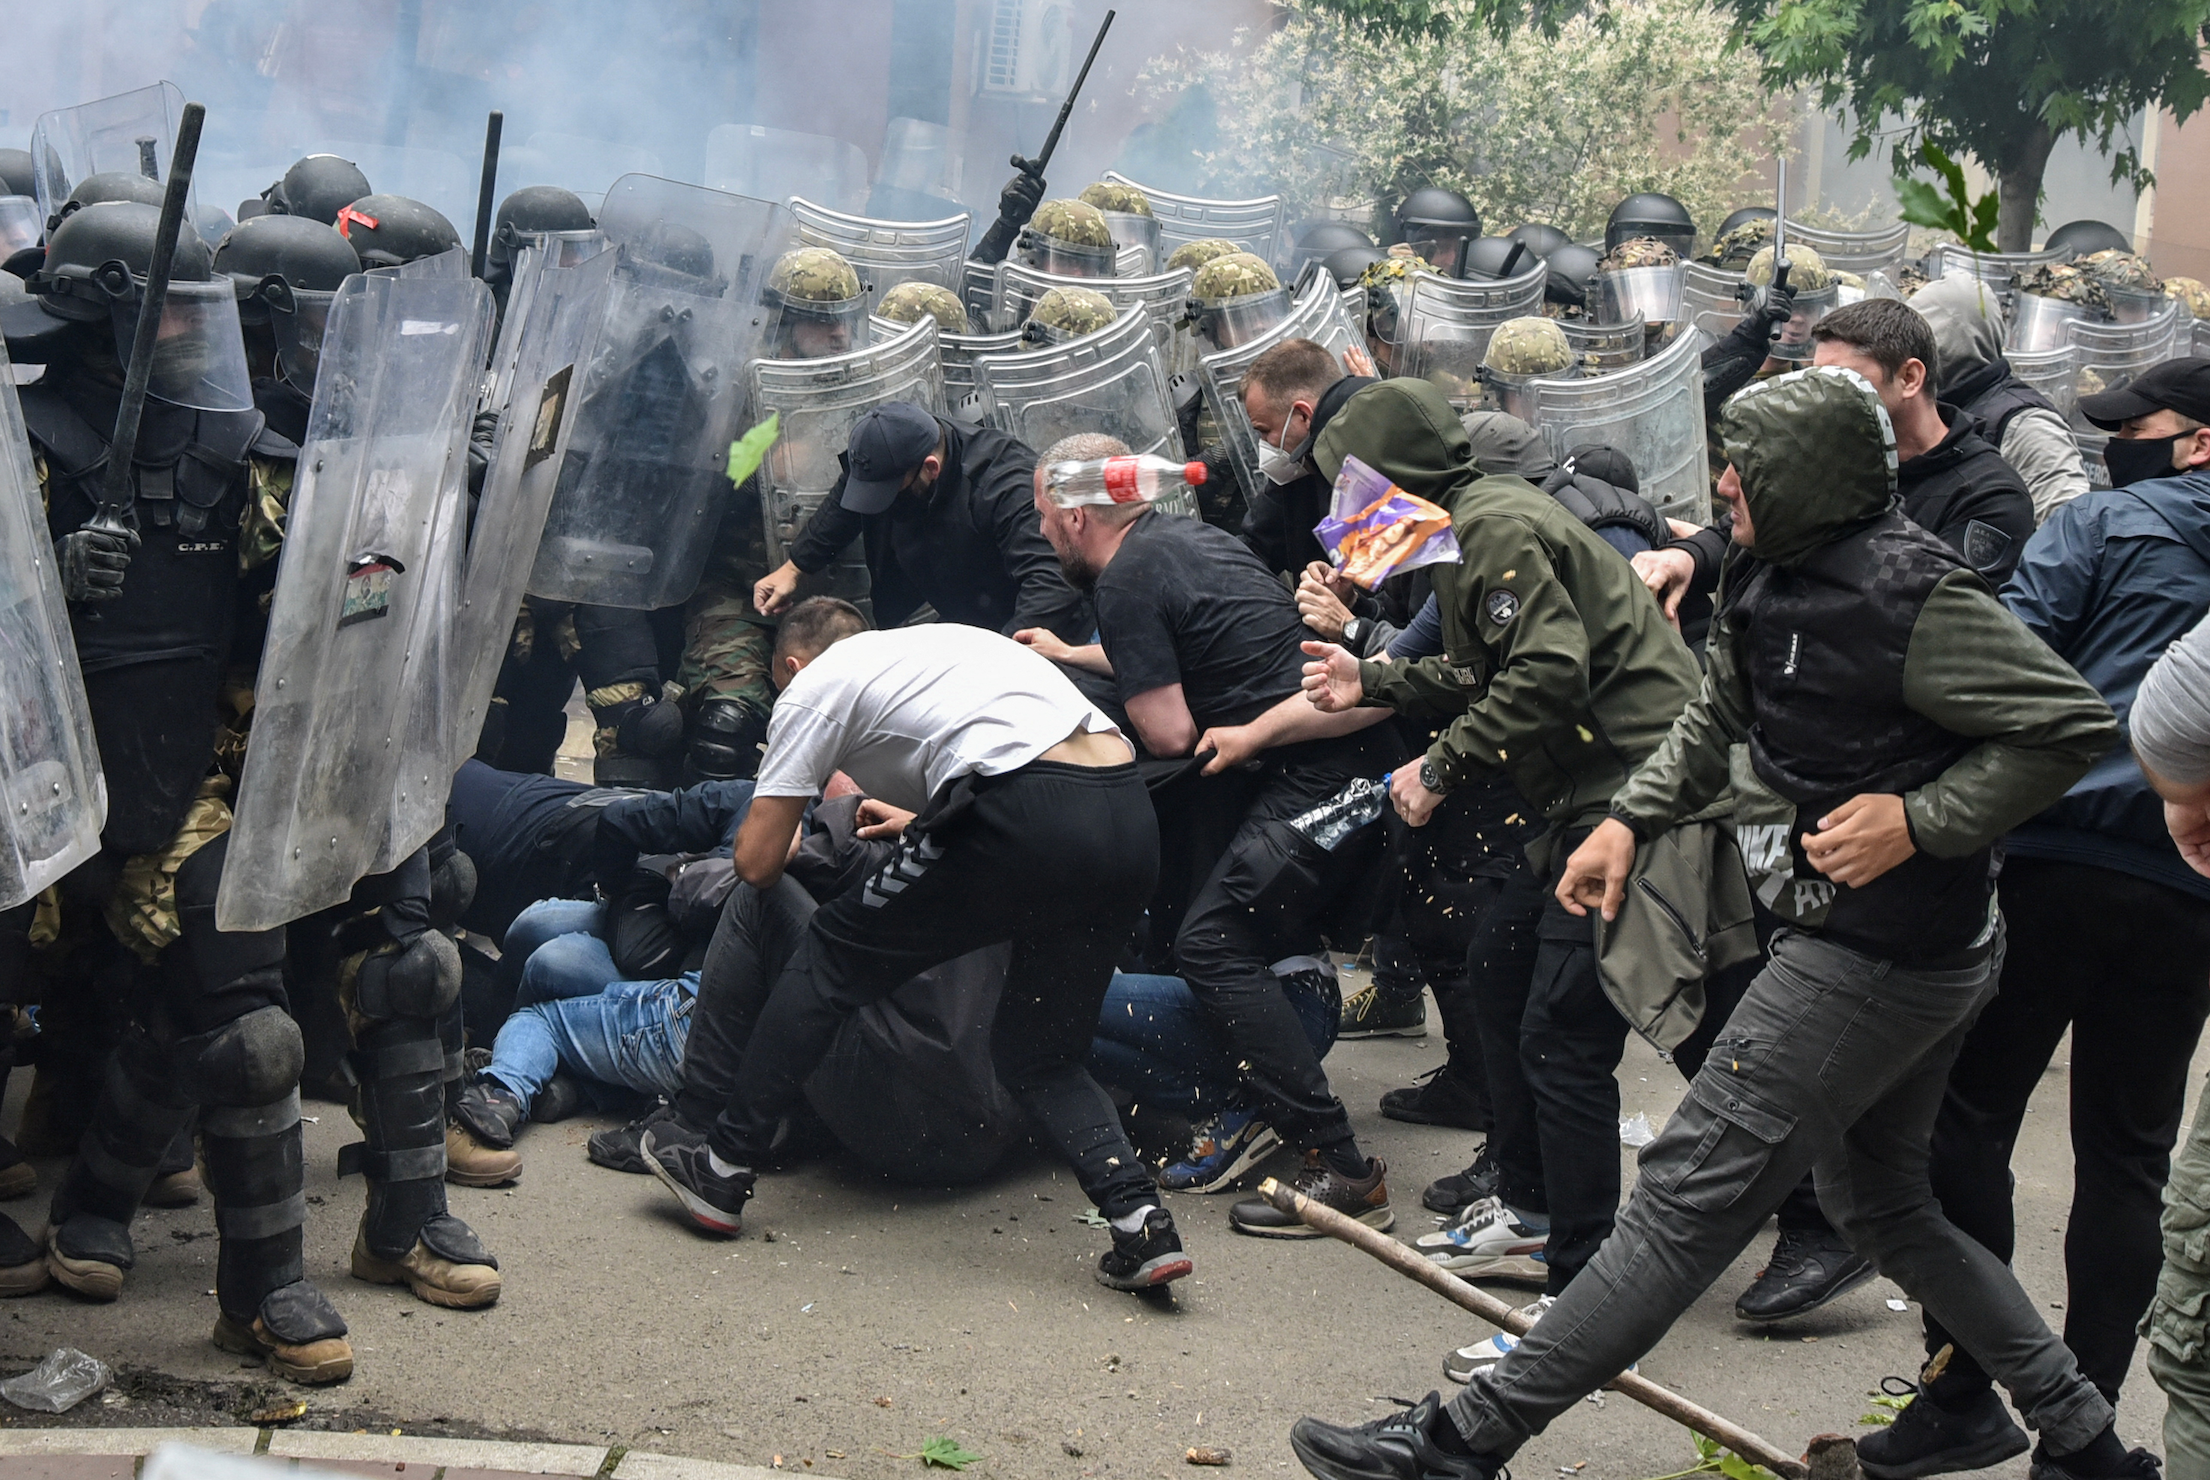  NATO Kosovo Force (KFOR) soldiers clash with local Kosovo Serb protesters at the entrance of the municipality office